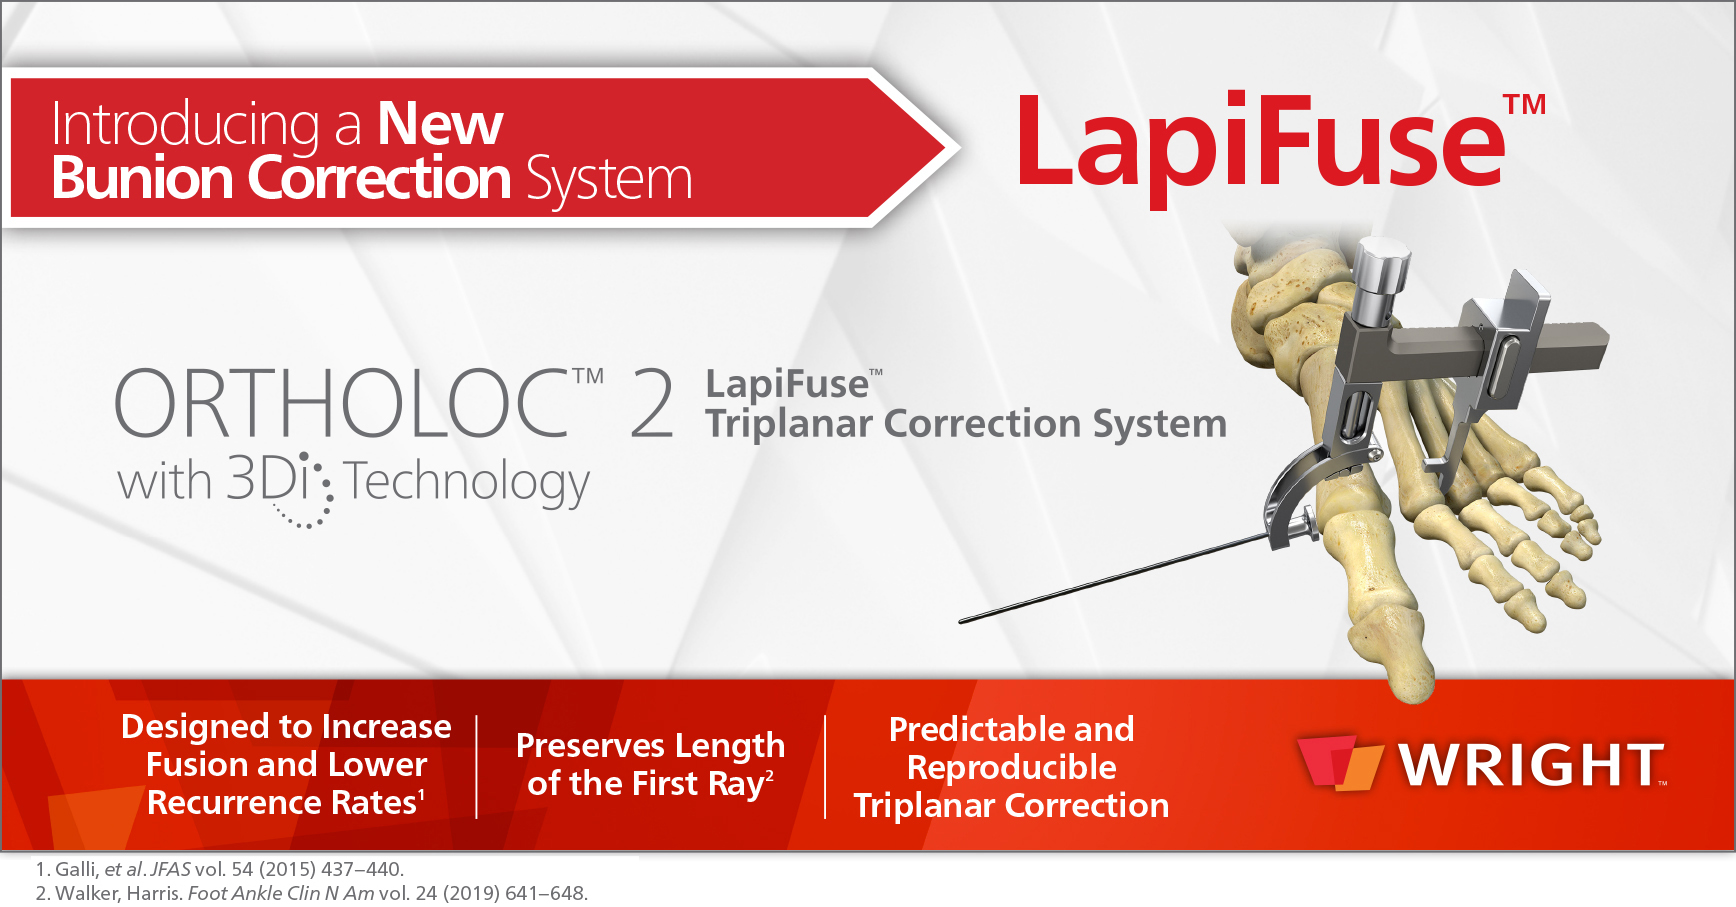 LapiFiuse bunionectomy allows predictable and reproducible correction in three dimensions while preserving the length of the great toe